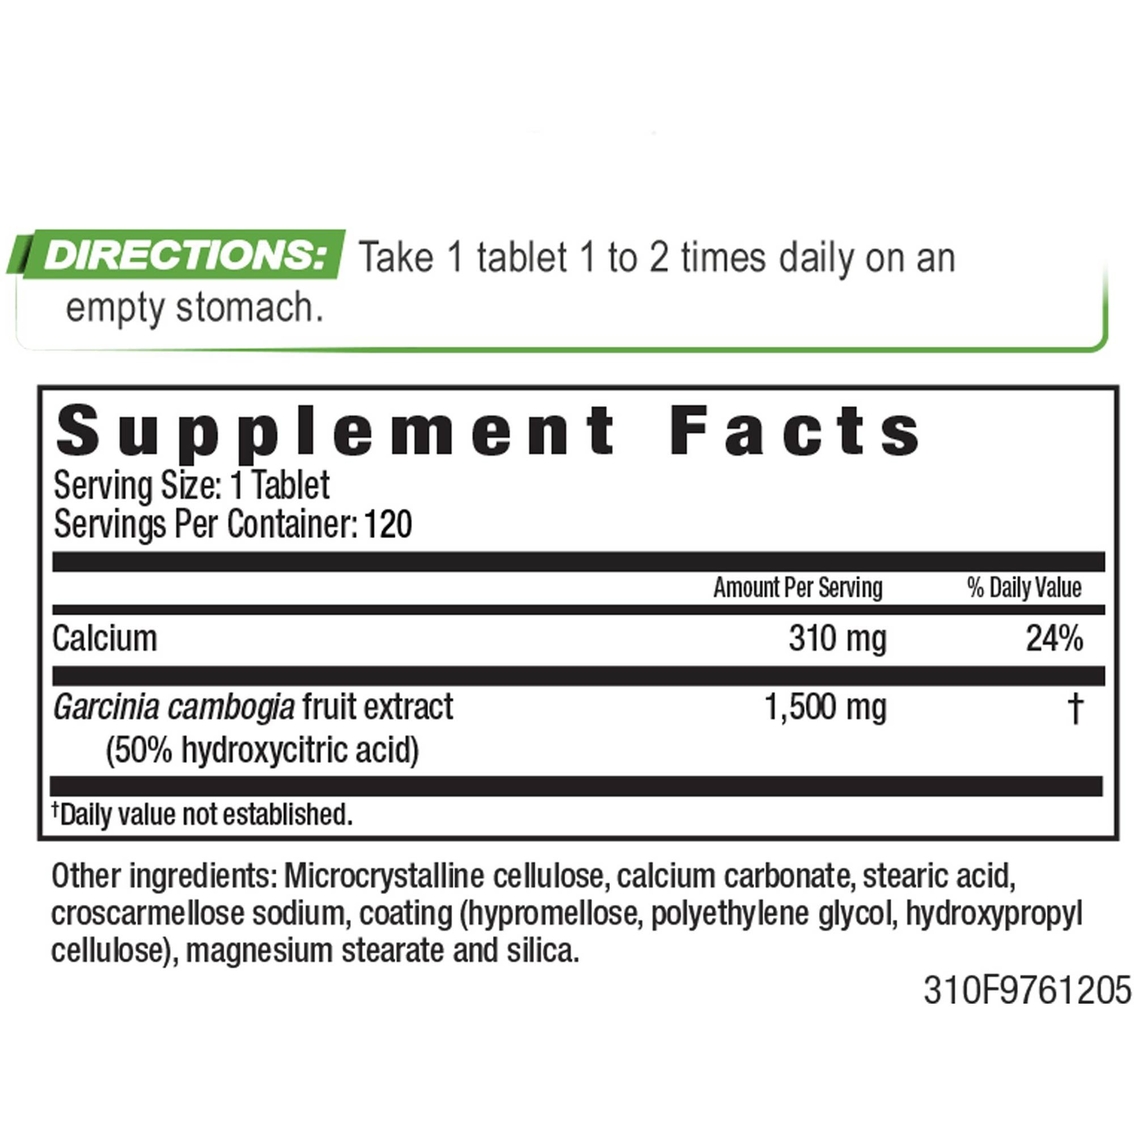 Garcinia Cambogia Weight Management Tablets 120 ct. - Image 2 of 2